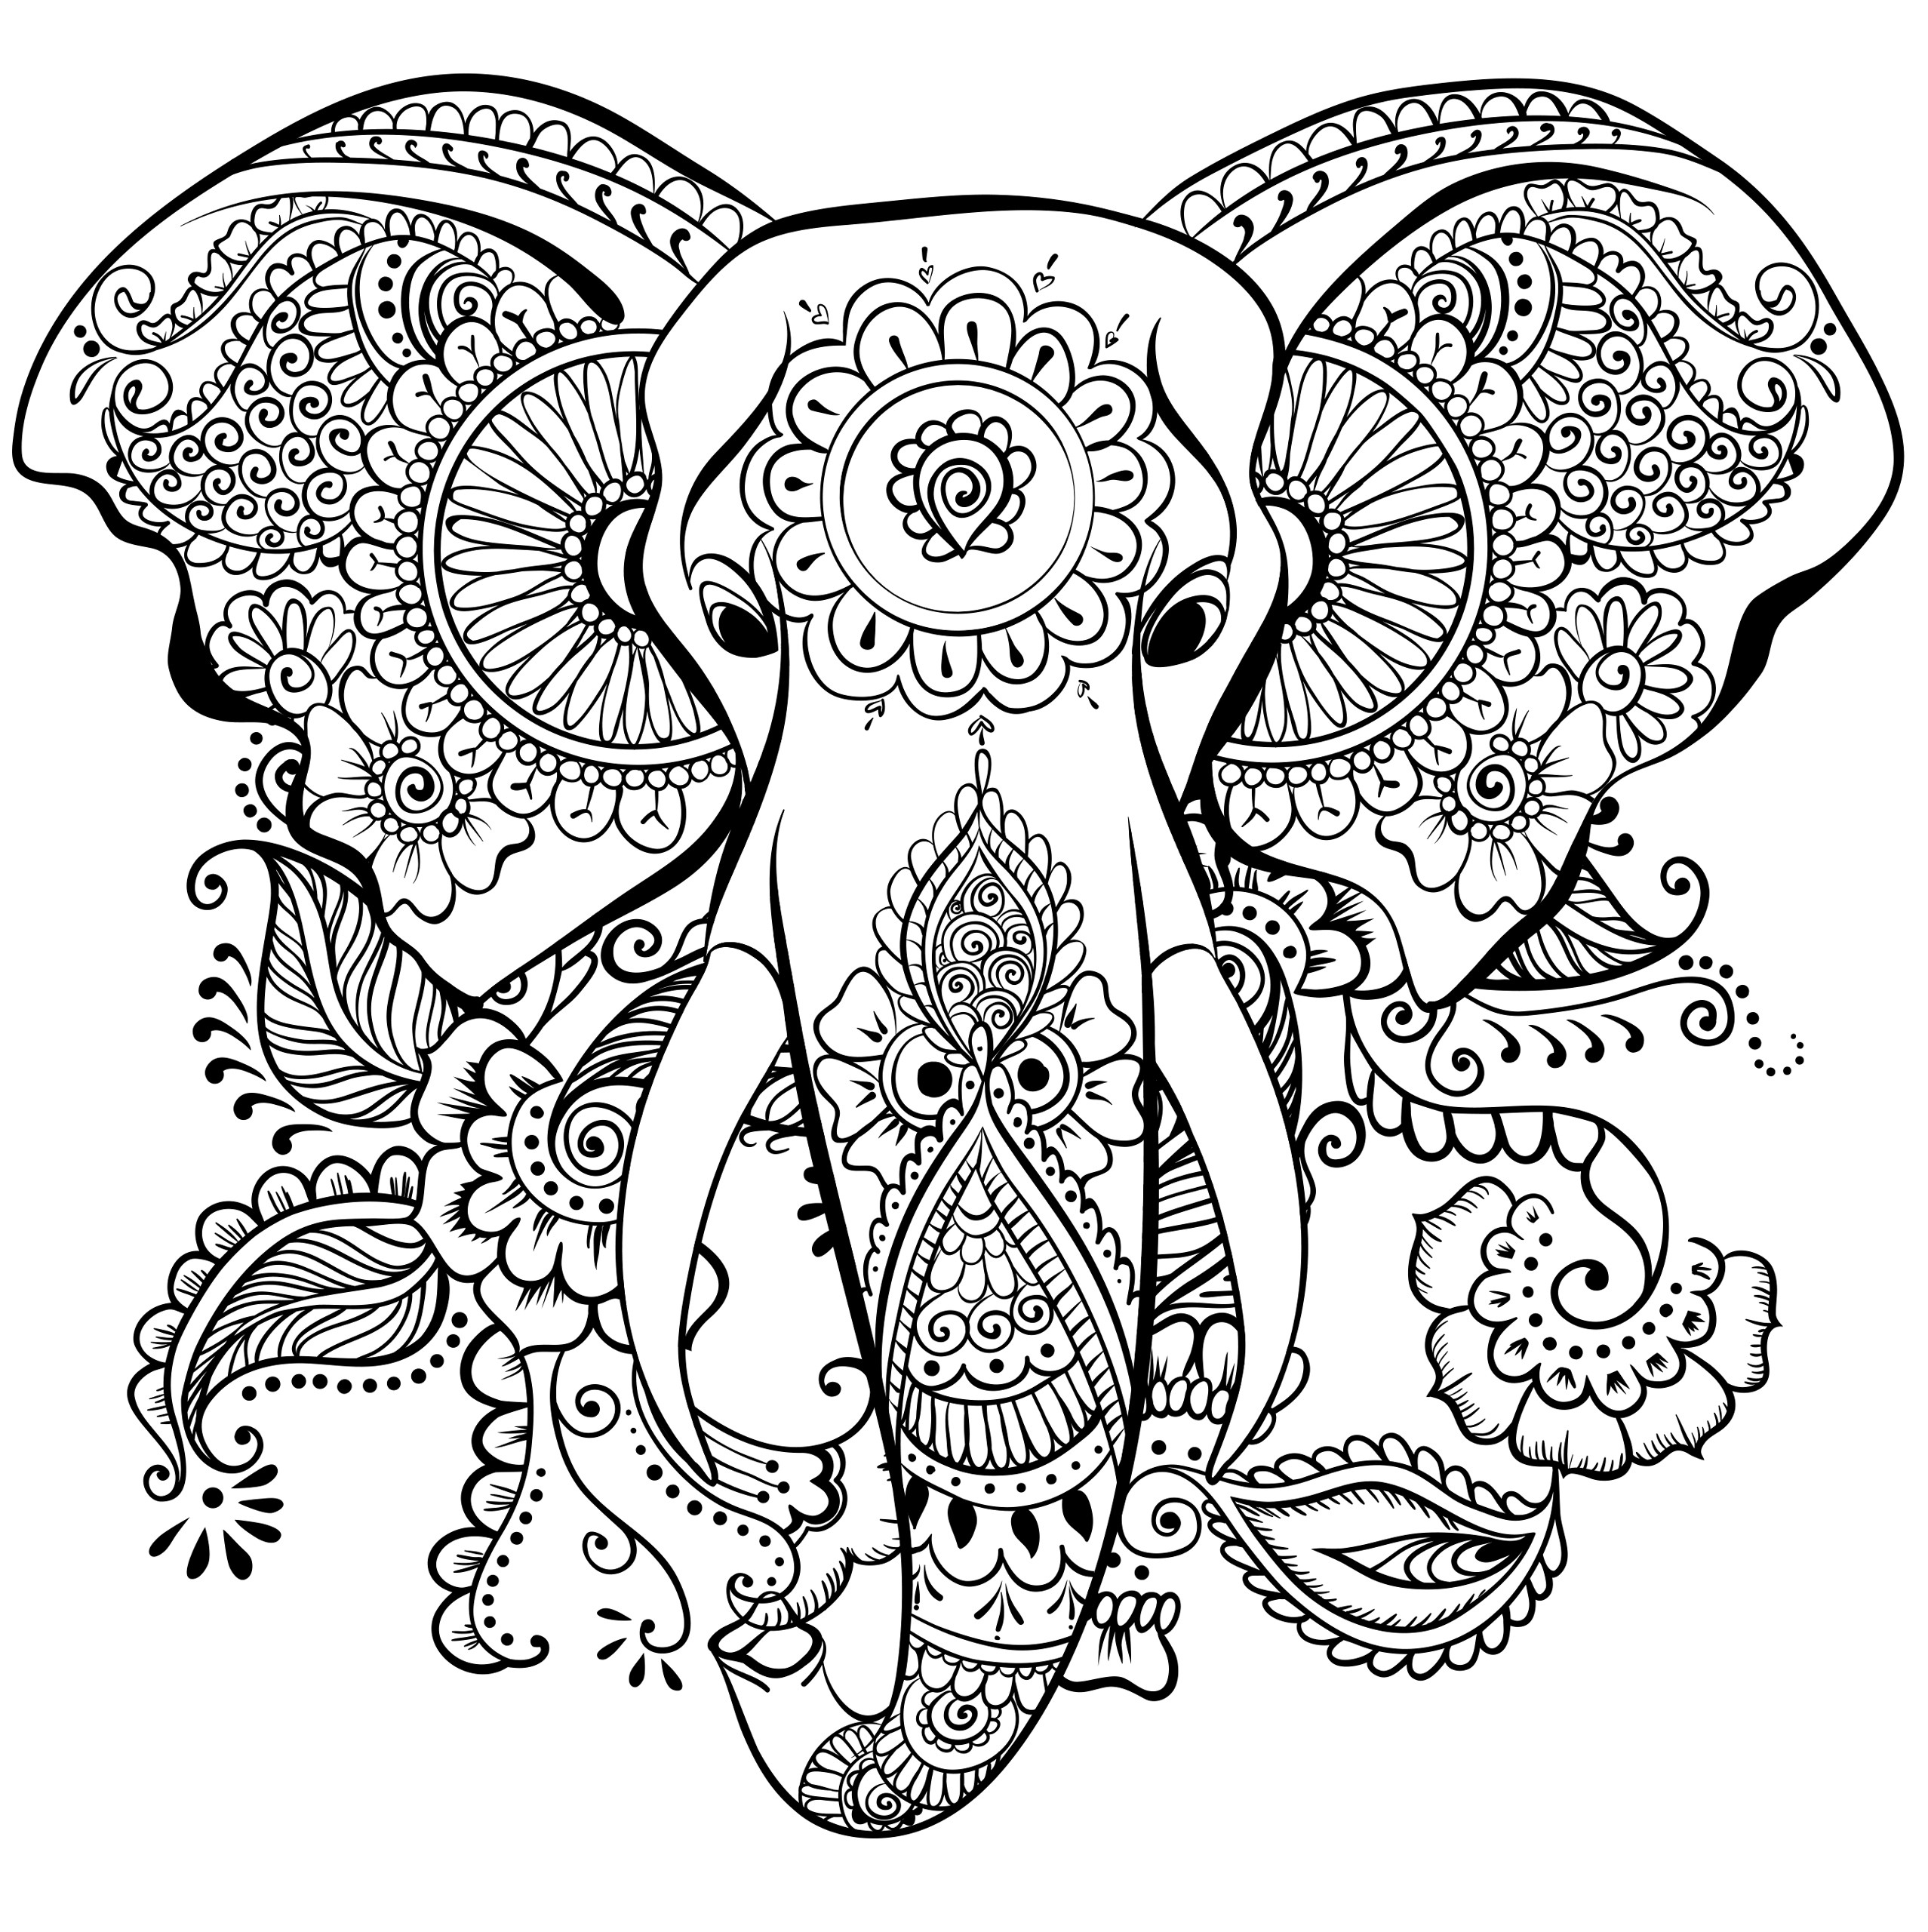 Printable Adult Coloring Pages
 63 Adult Coloring Pages To Nourish Your Mental Visual